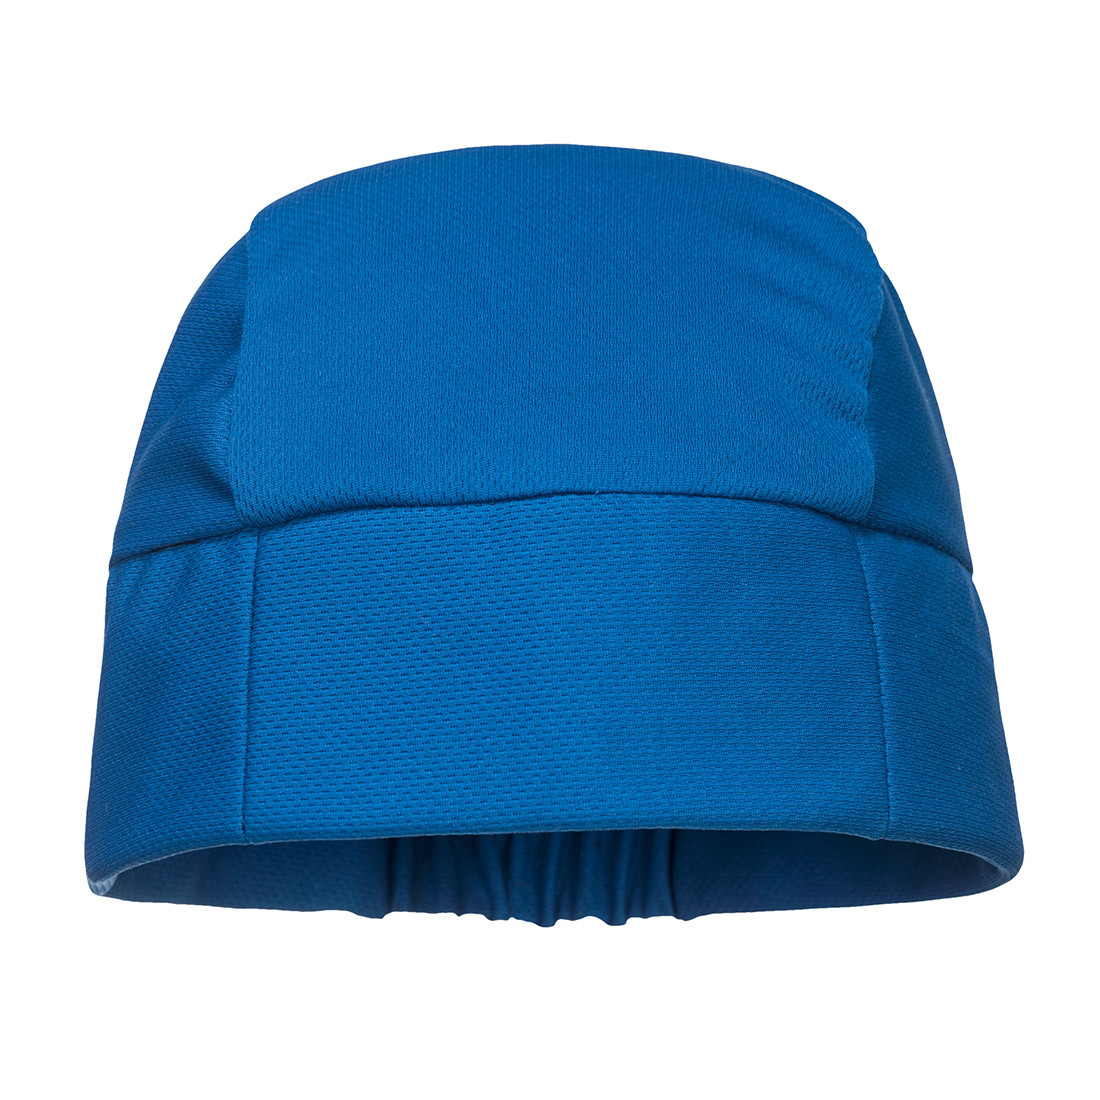 Cooling Crown Beanie - Personal protection